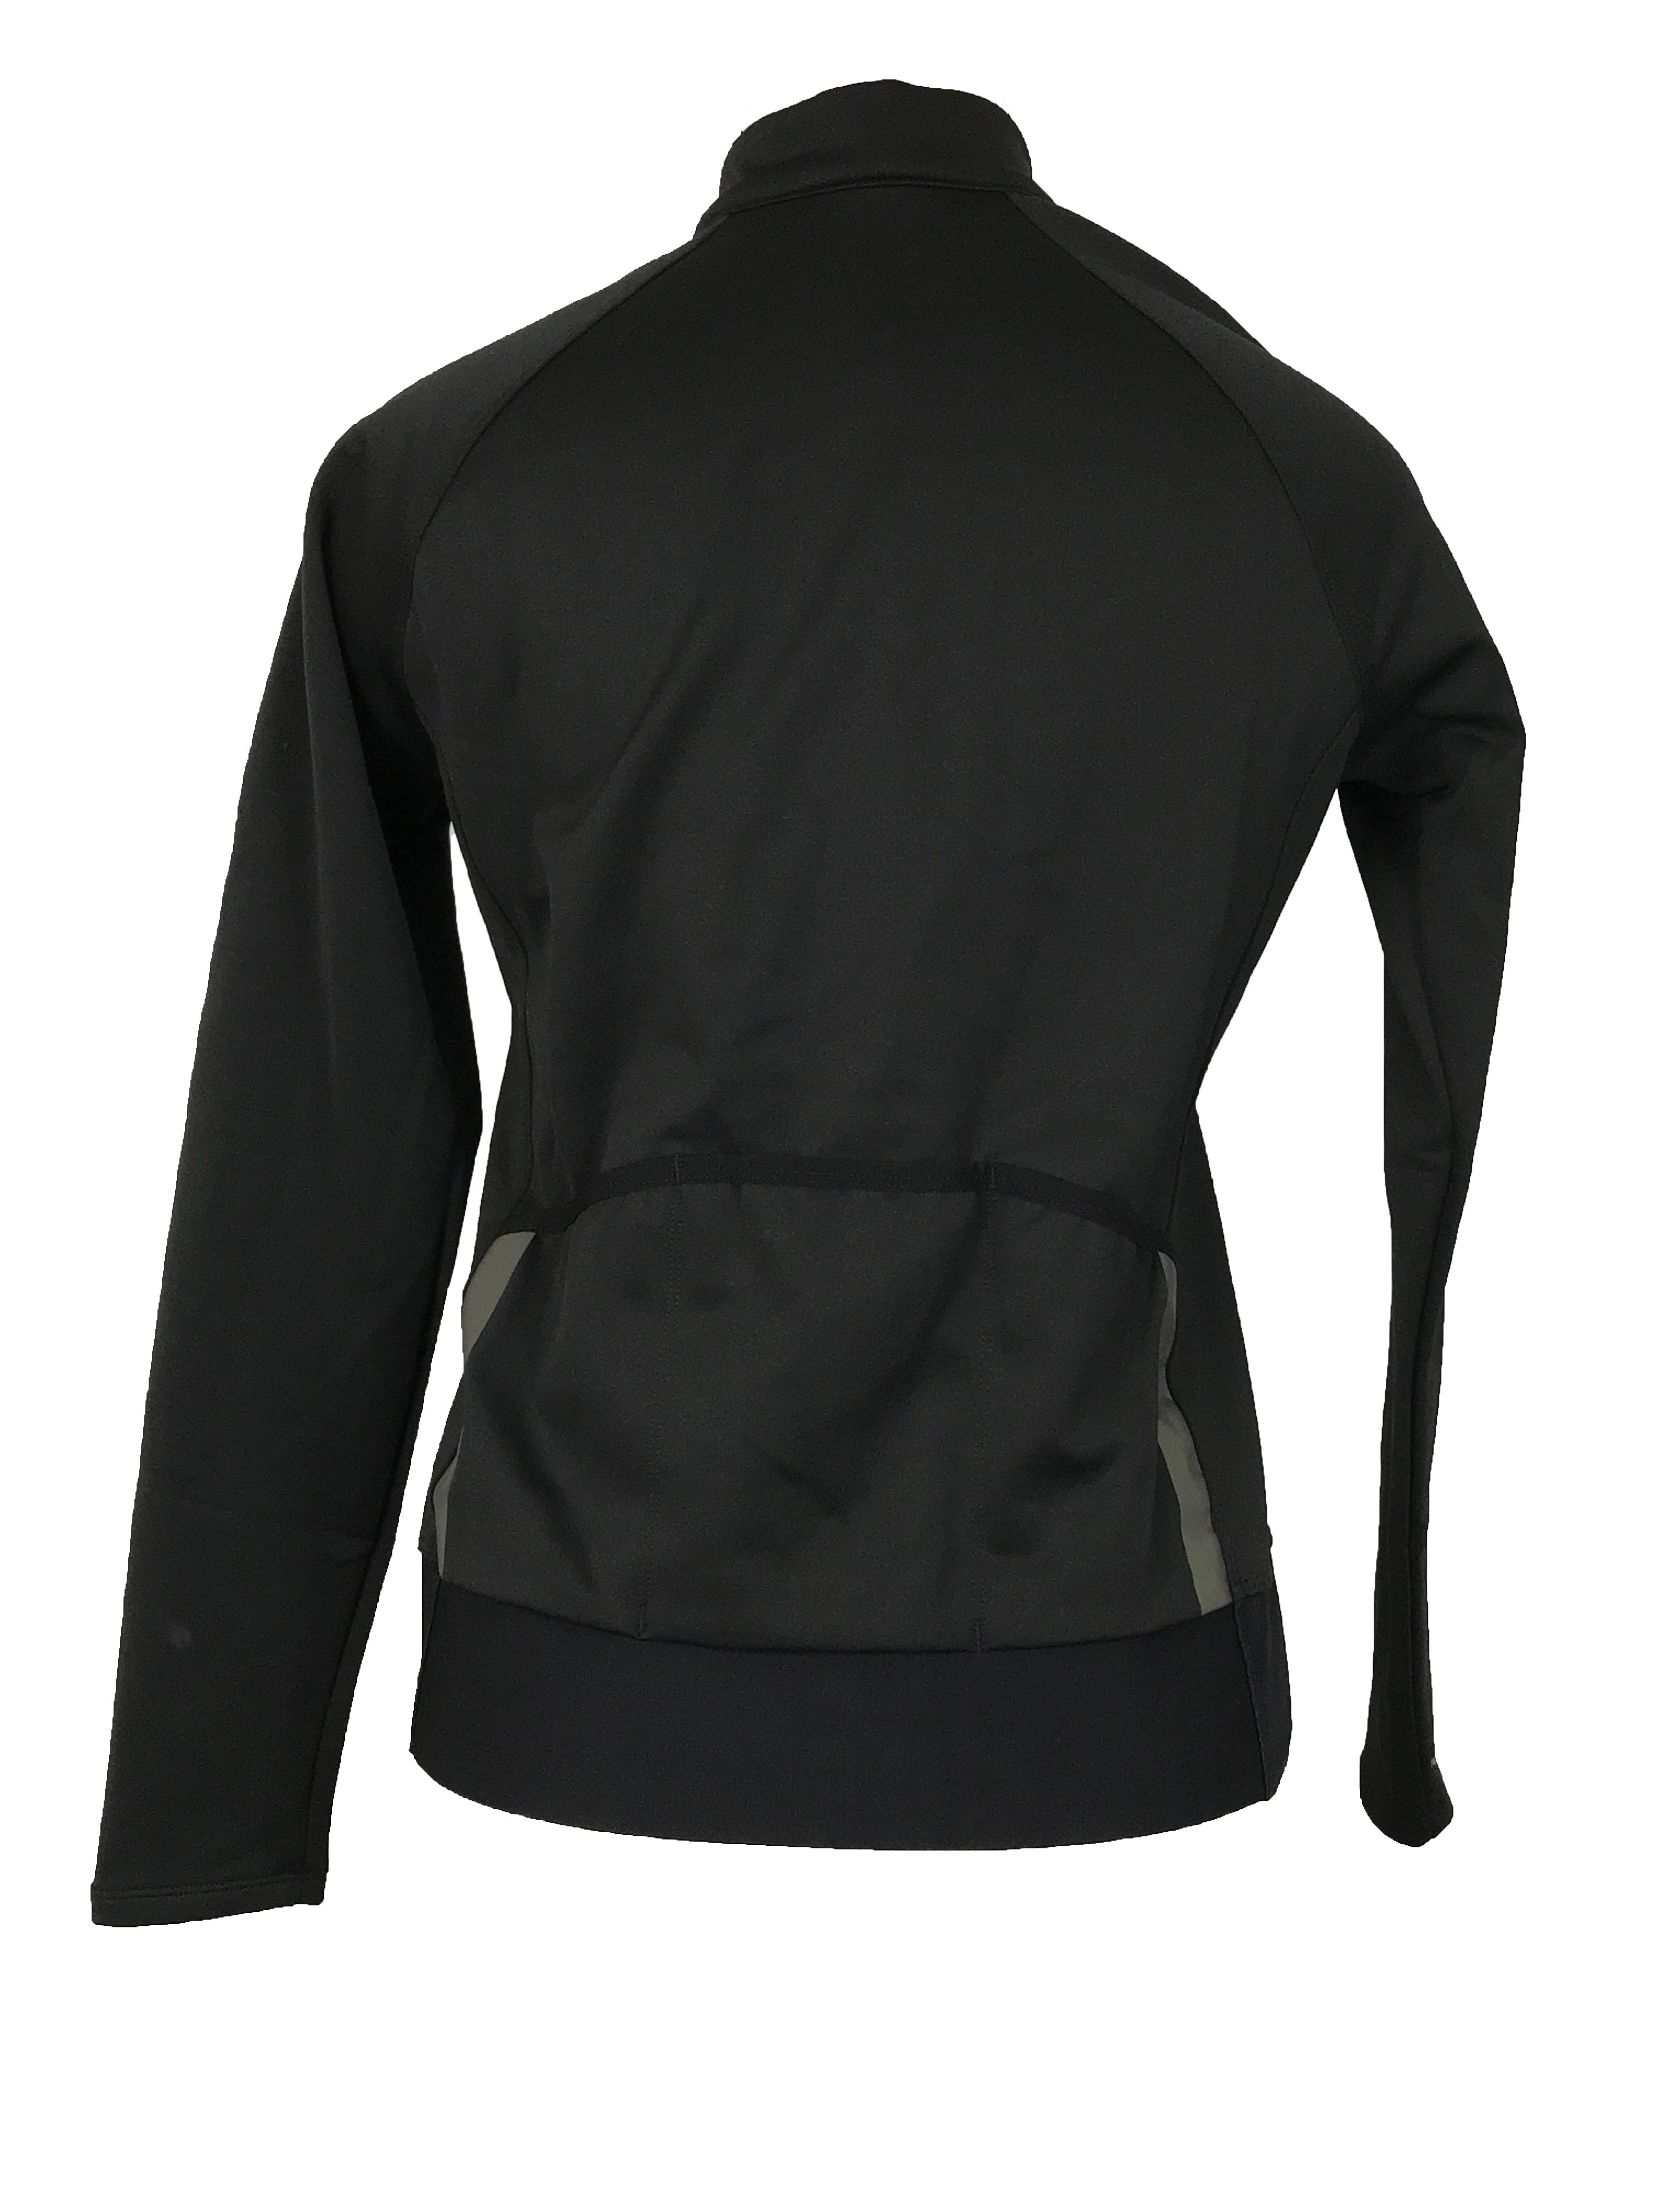 Specialized RBX Expert Thermal Black Long Sleeve Jersey Women's Size M NWT